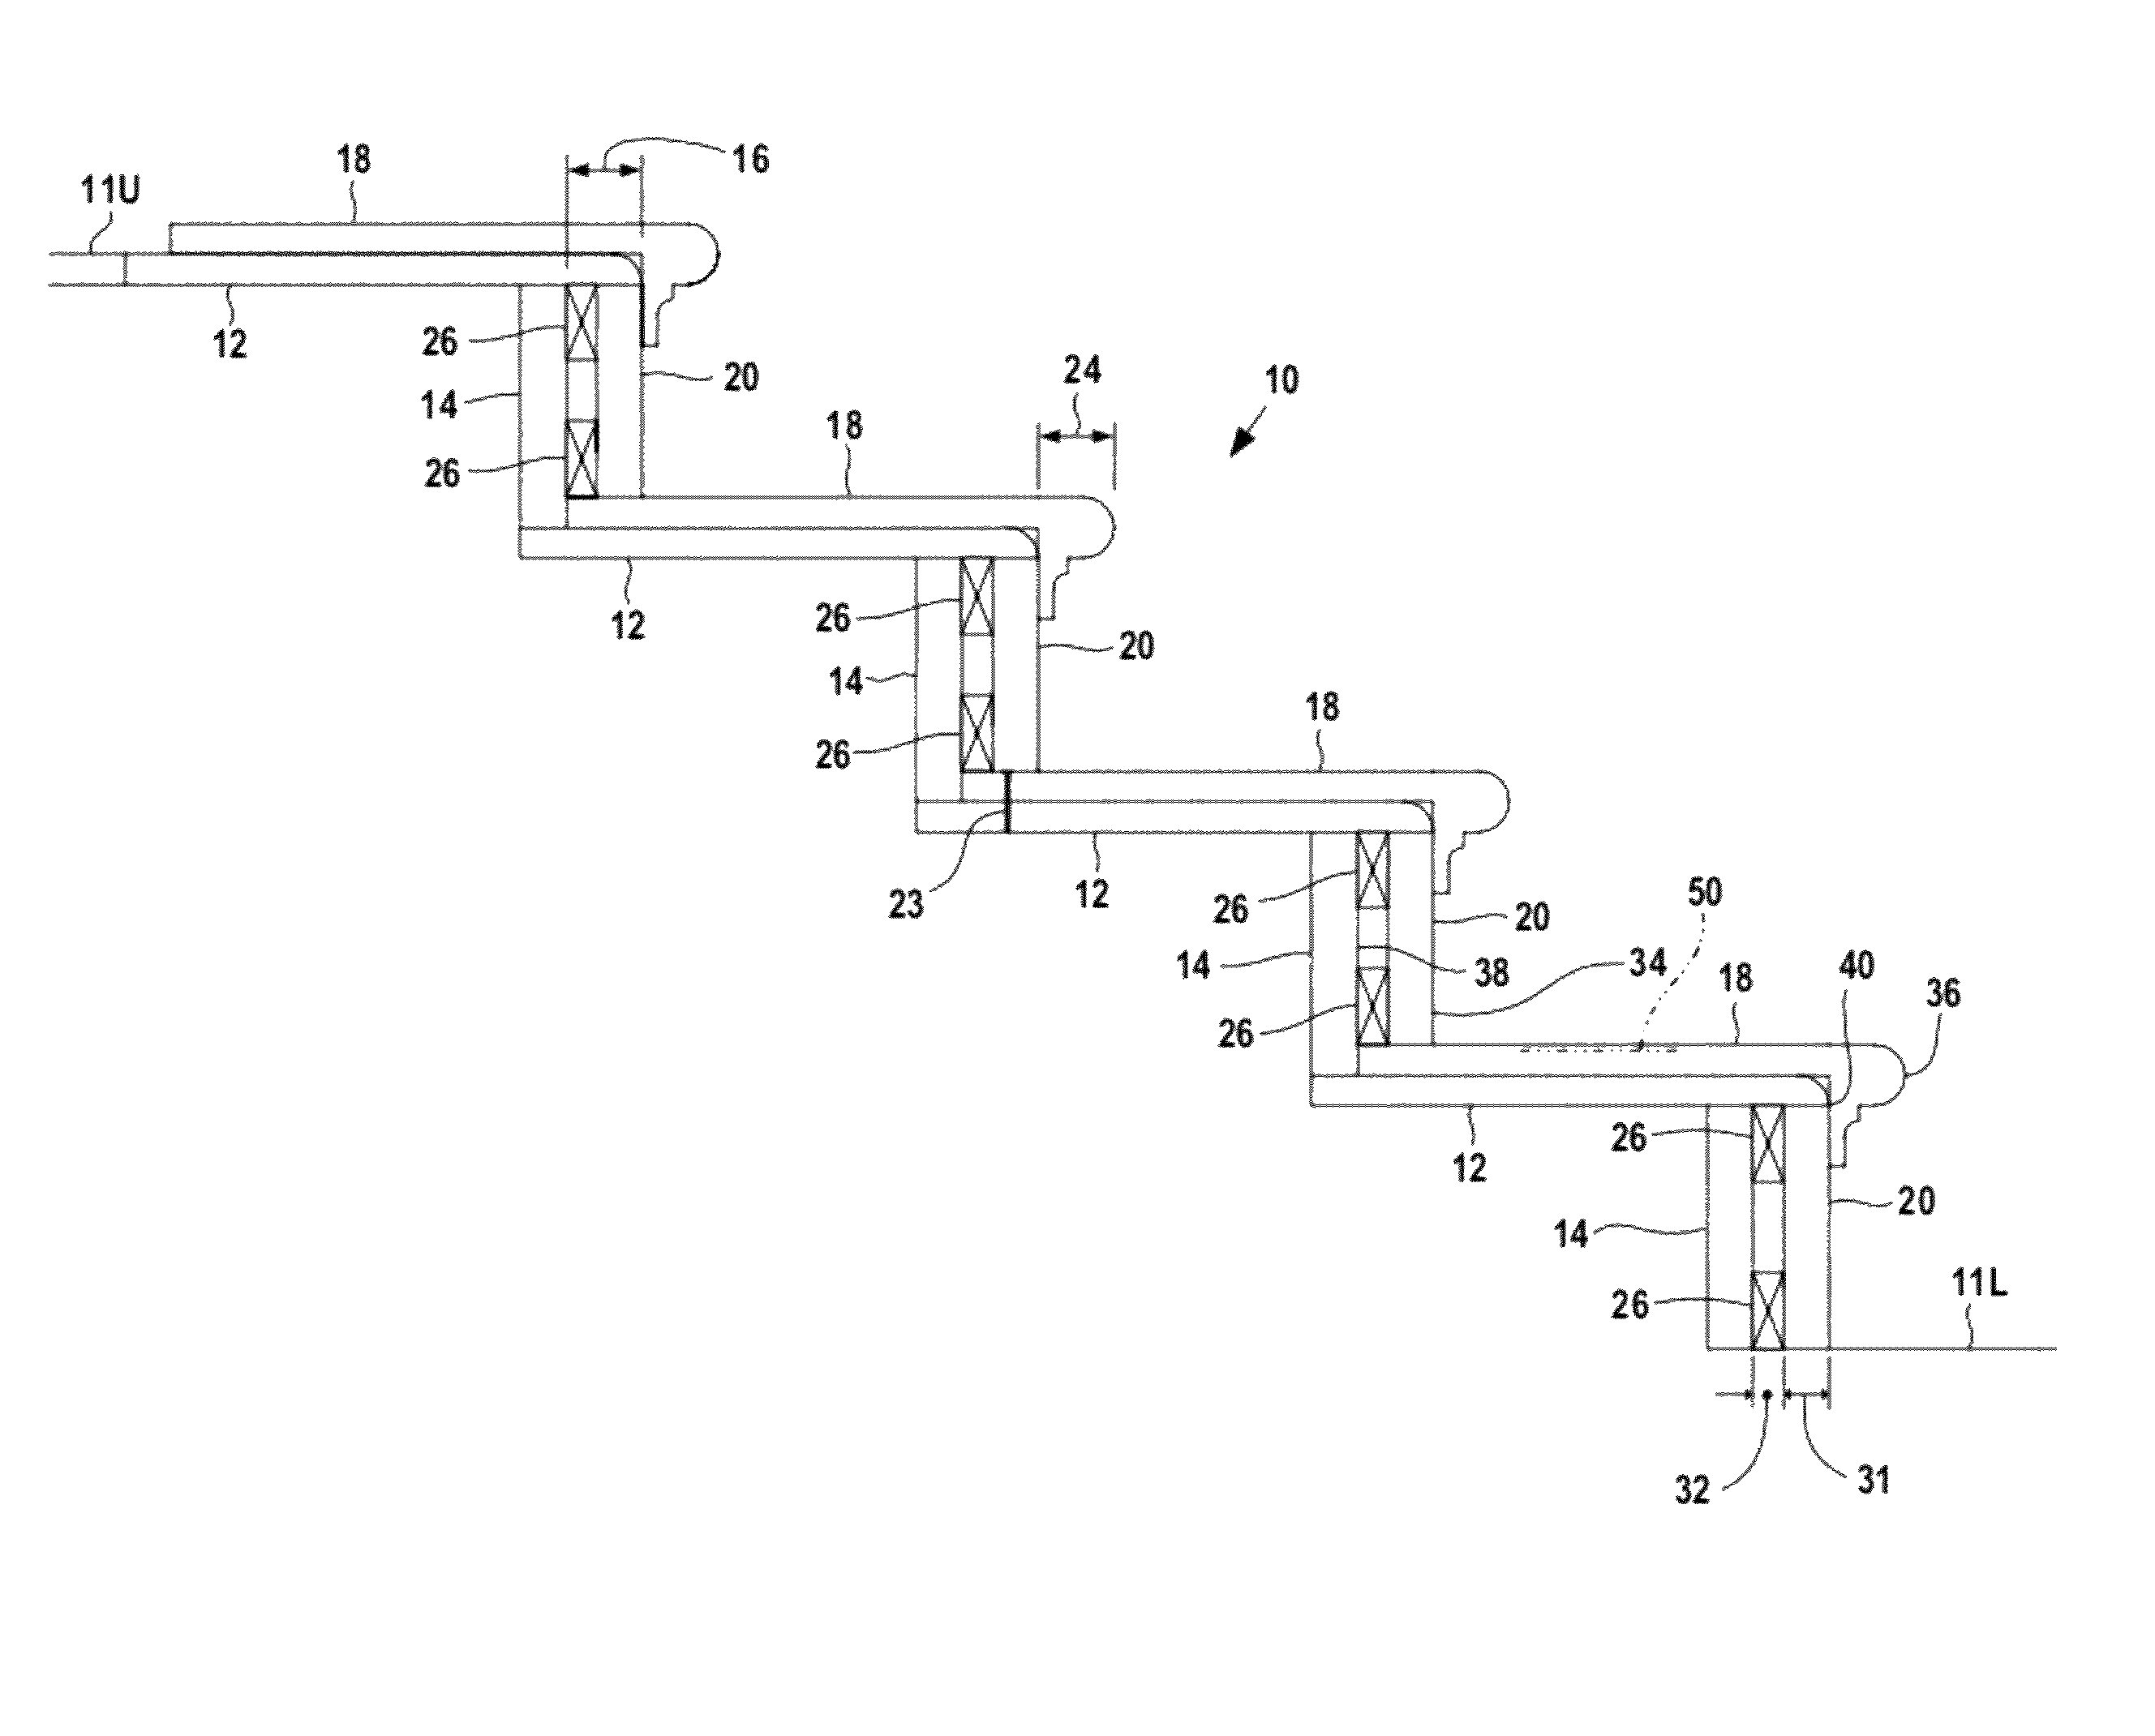 Method of refacing a staircase